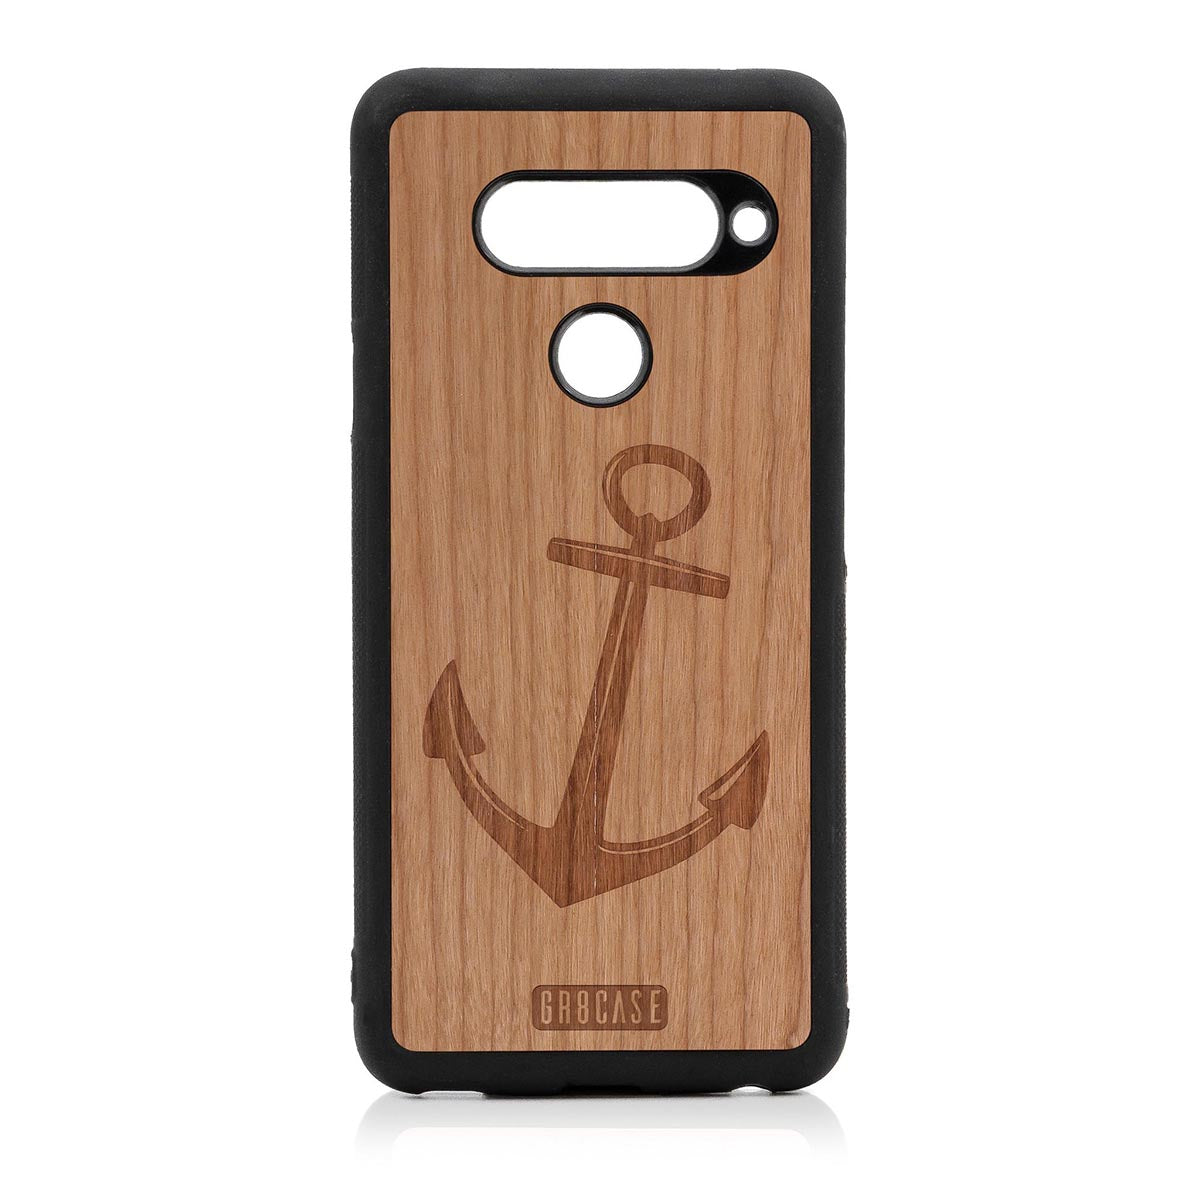 Anchor Design Wood Case For LG V40 ThinQ by GR8CASE